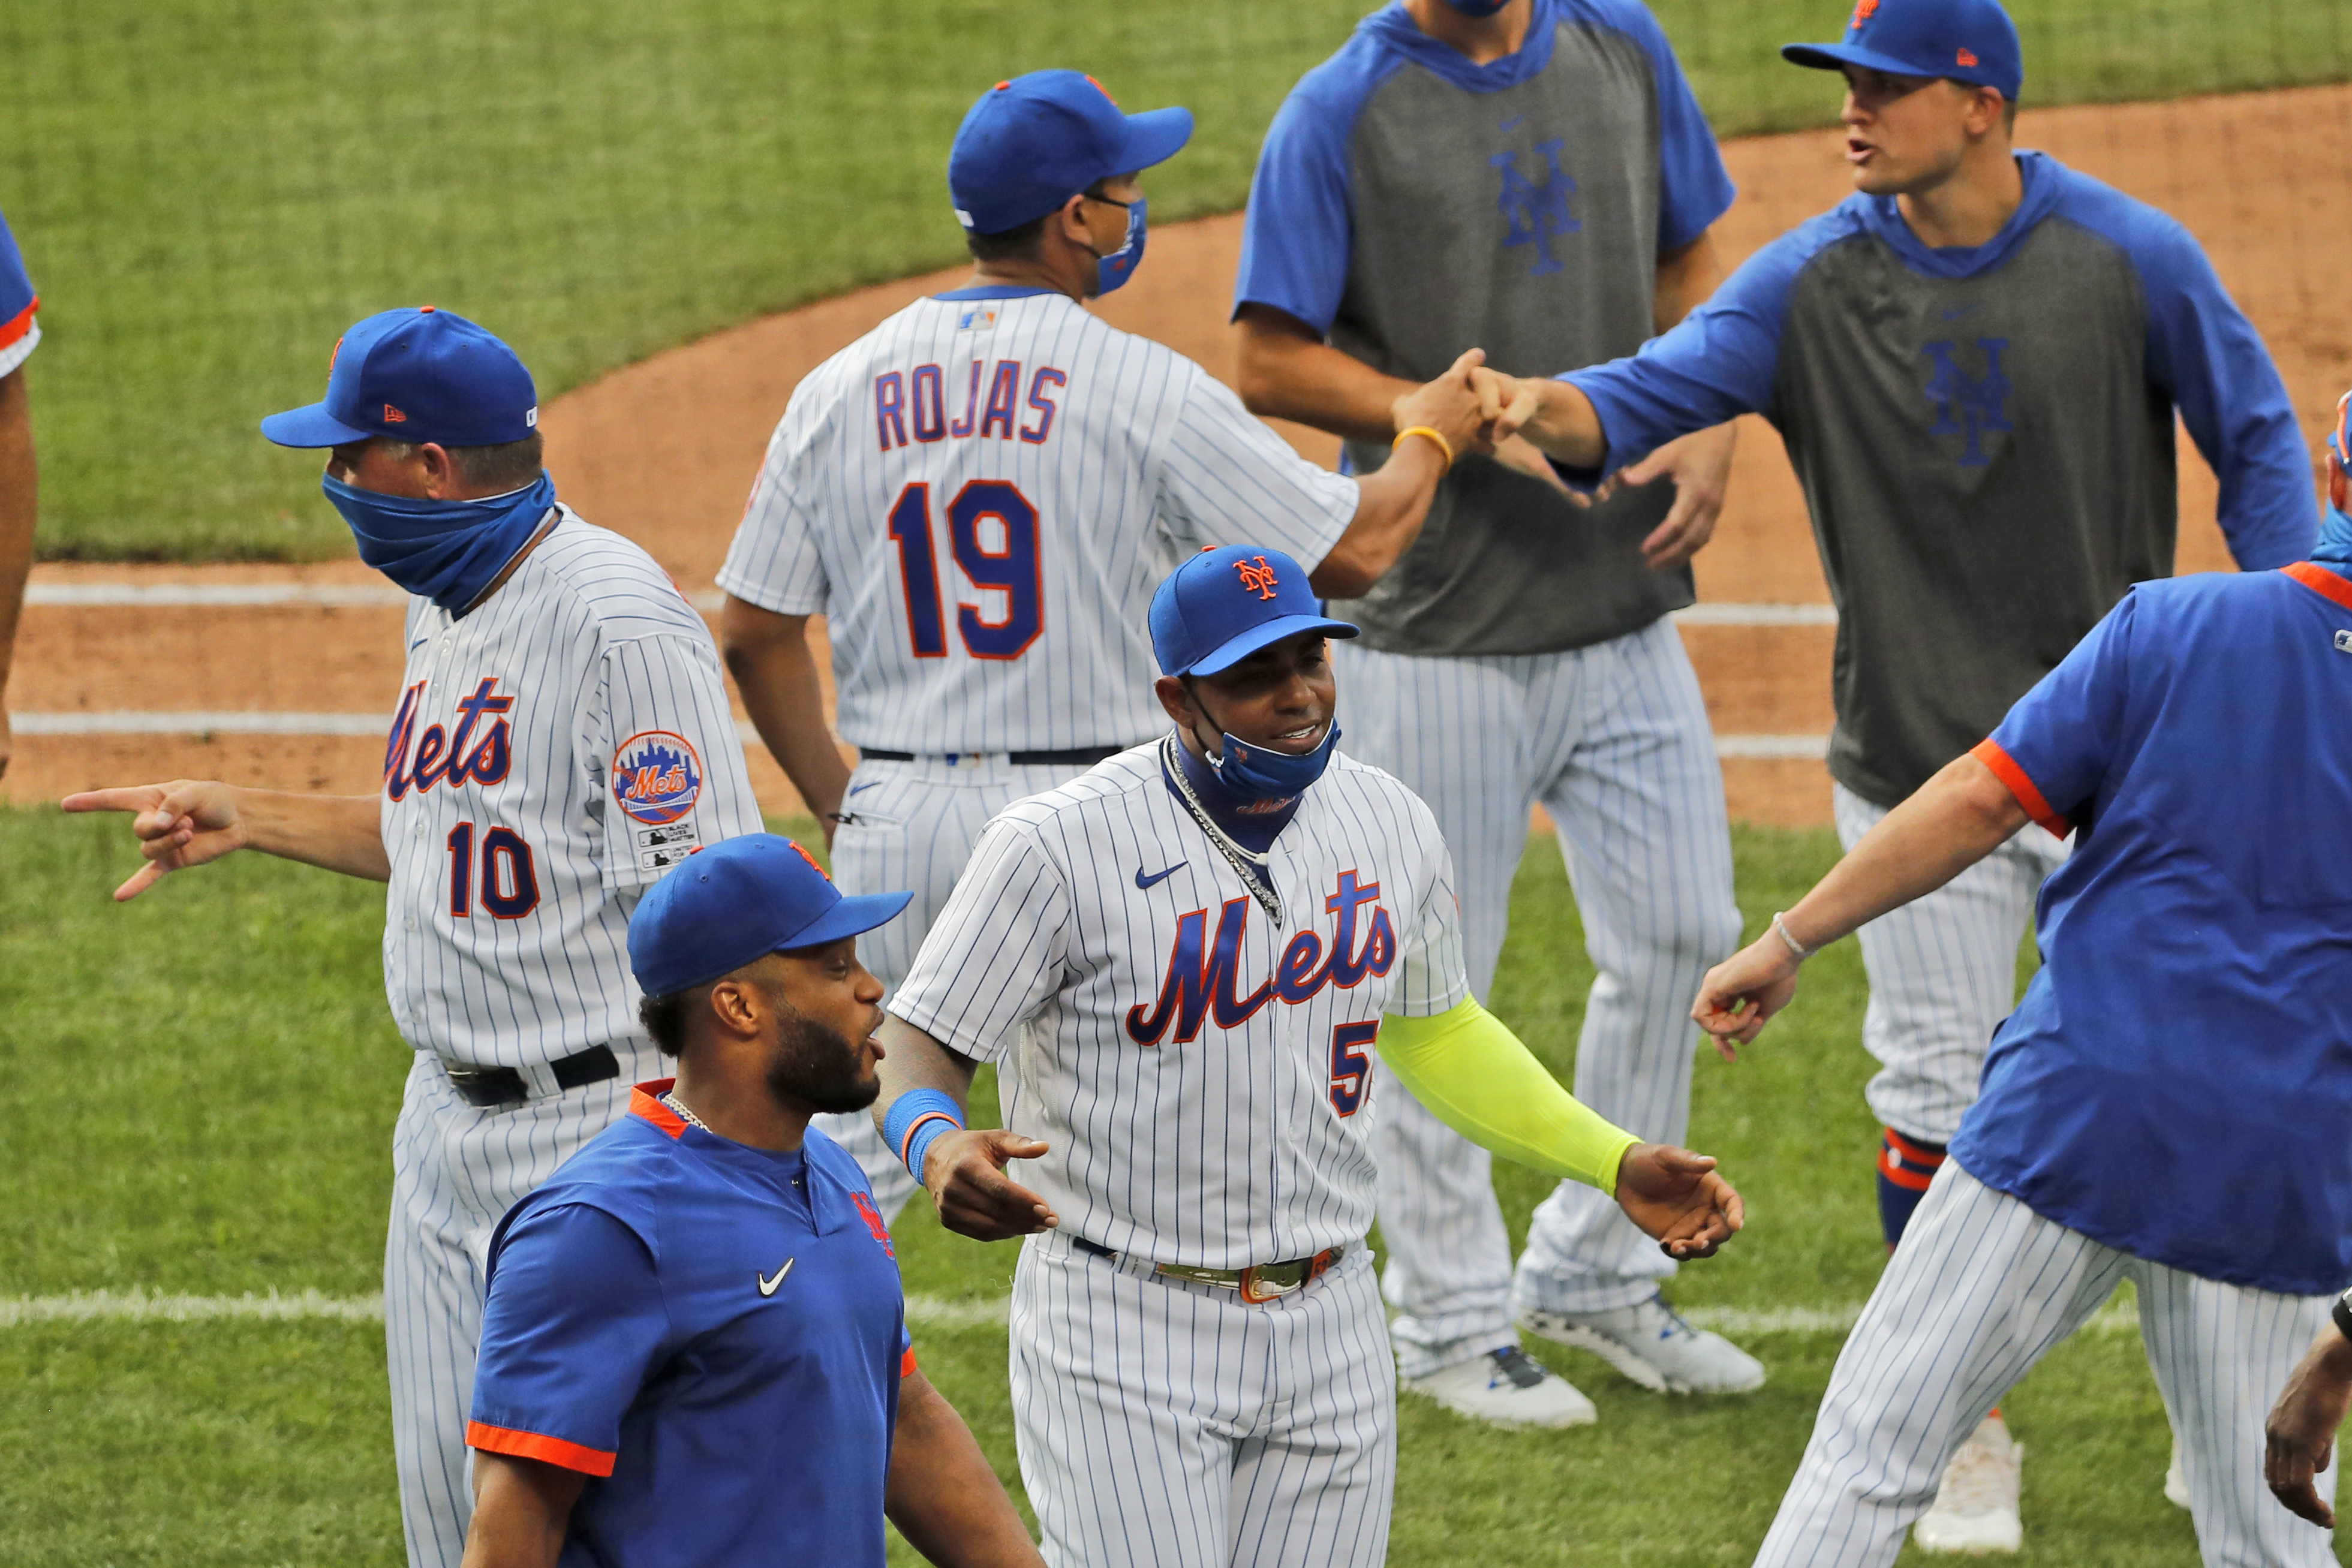 Yoenis Cespedes: New York Mets OF injured ankle after wild boar run-in